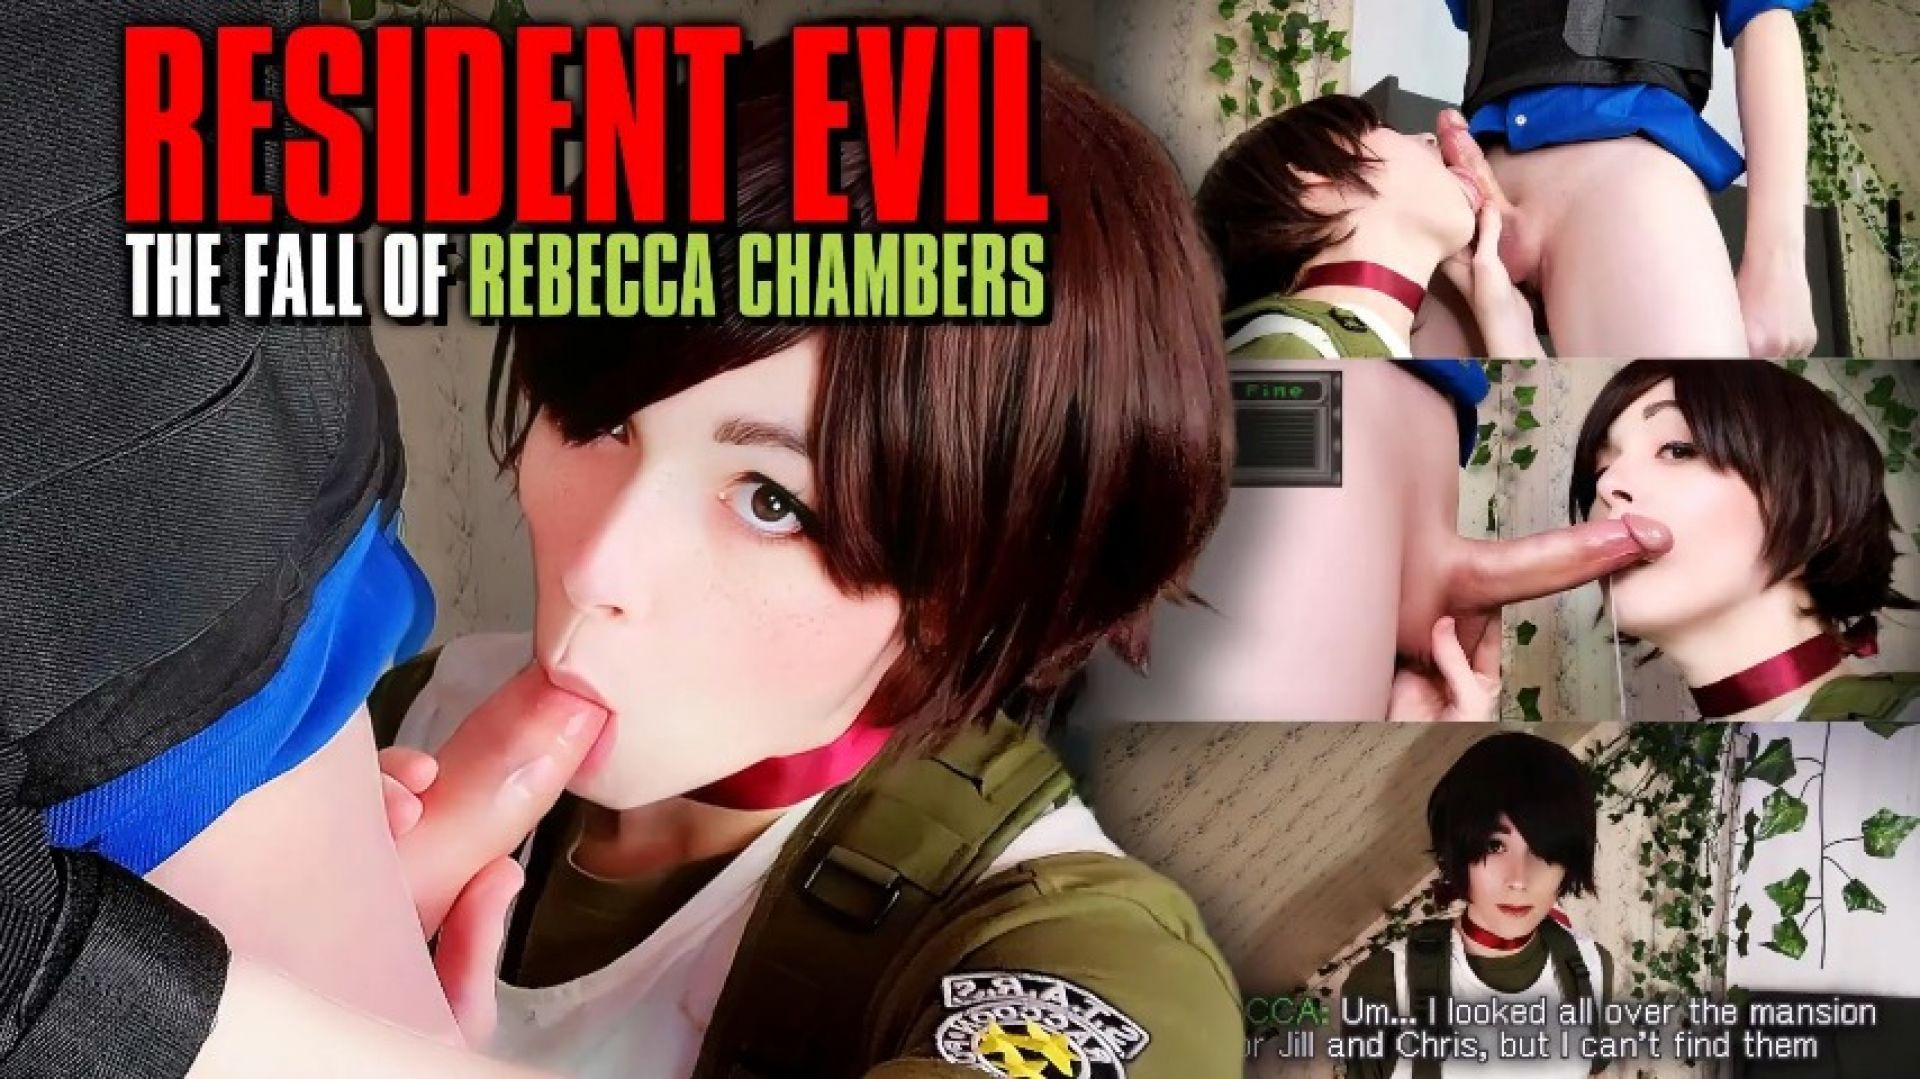 RESIDENT EVIL: The Fall of Rebecca Chambers